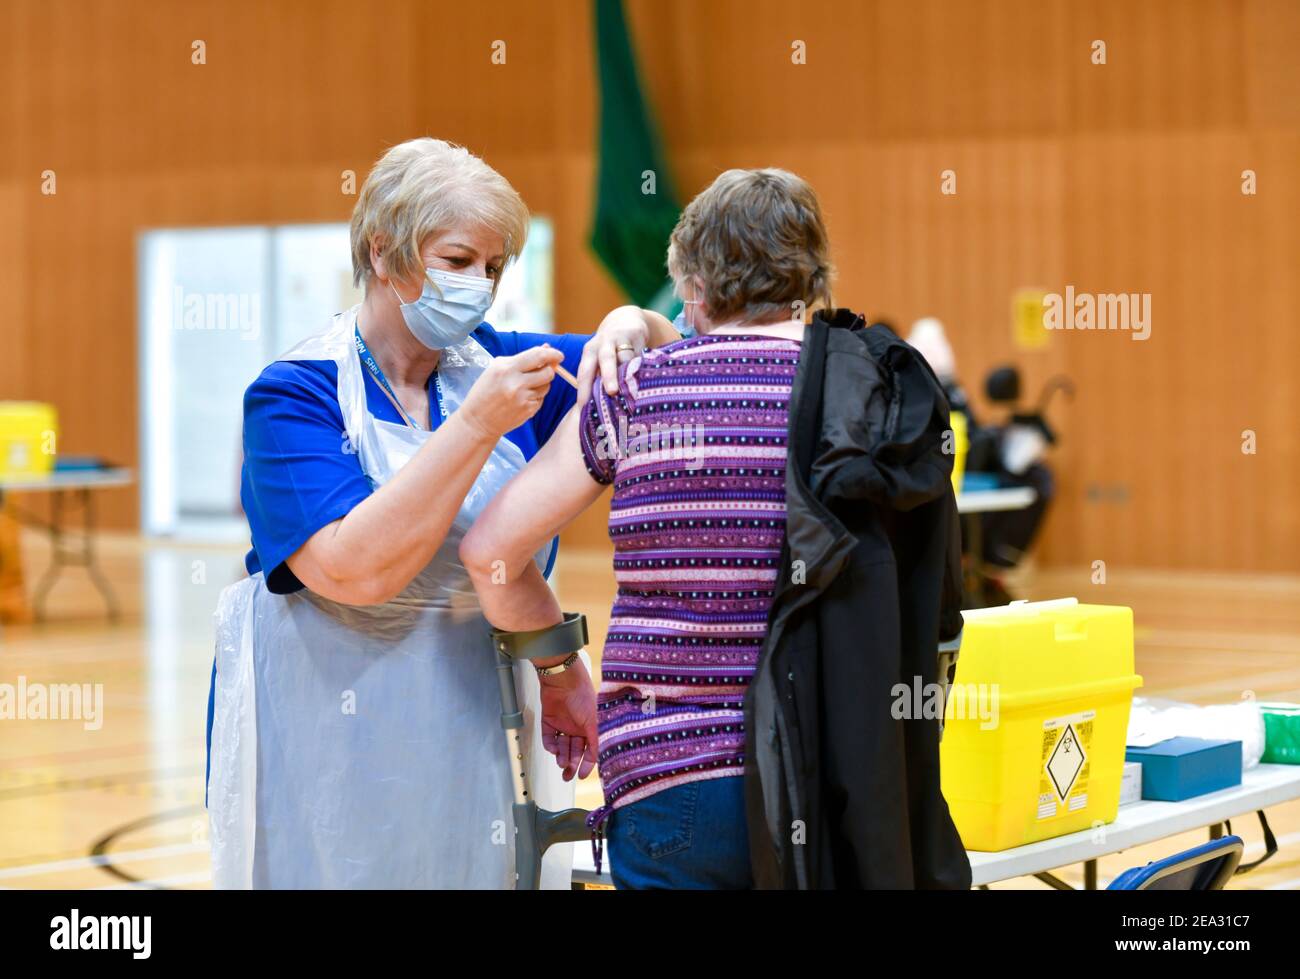 A Covid19 vaccination session held at Workington Leisure Centre in Cumbria using the Oxford Astra Zeneca vaccine. The cohort being given the vaccine are those over 70 years-old along with younger people who had been shielding or were clinically extremely vulnerable. The Workington Primary Care Network relocated from the town's surgeries to the larger space of the leisure centre to speed up the vaccine delivery to fight Coronavirus, Covid-19: 6 February 2021 STUART WALKER  Stuart Walker Photography 2021 Stock Photo